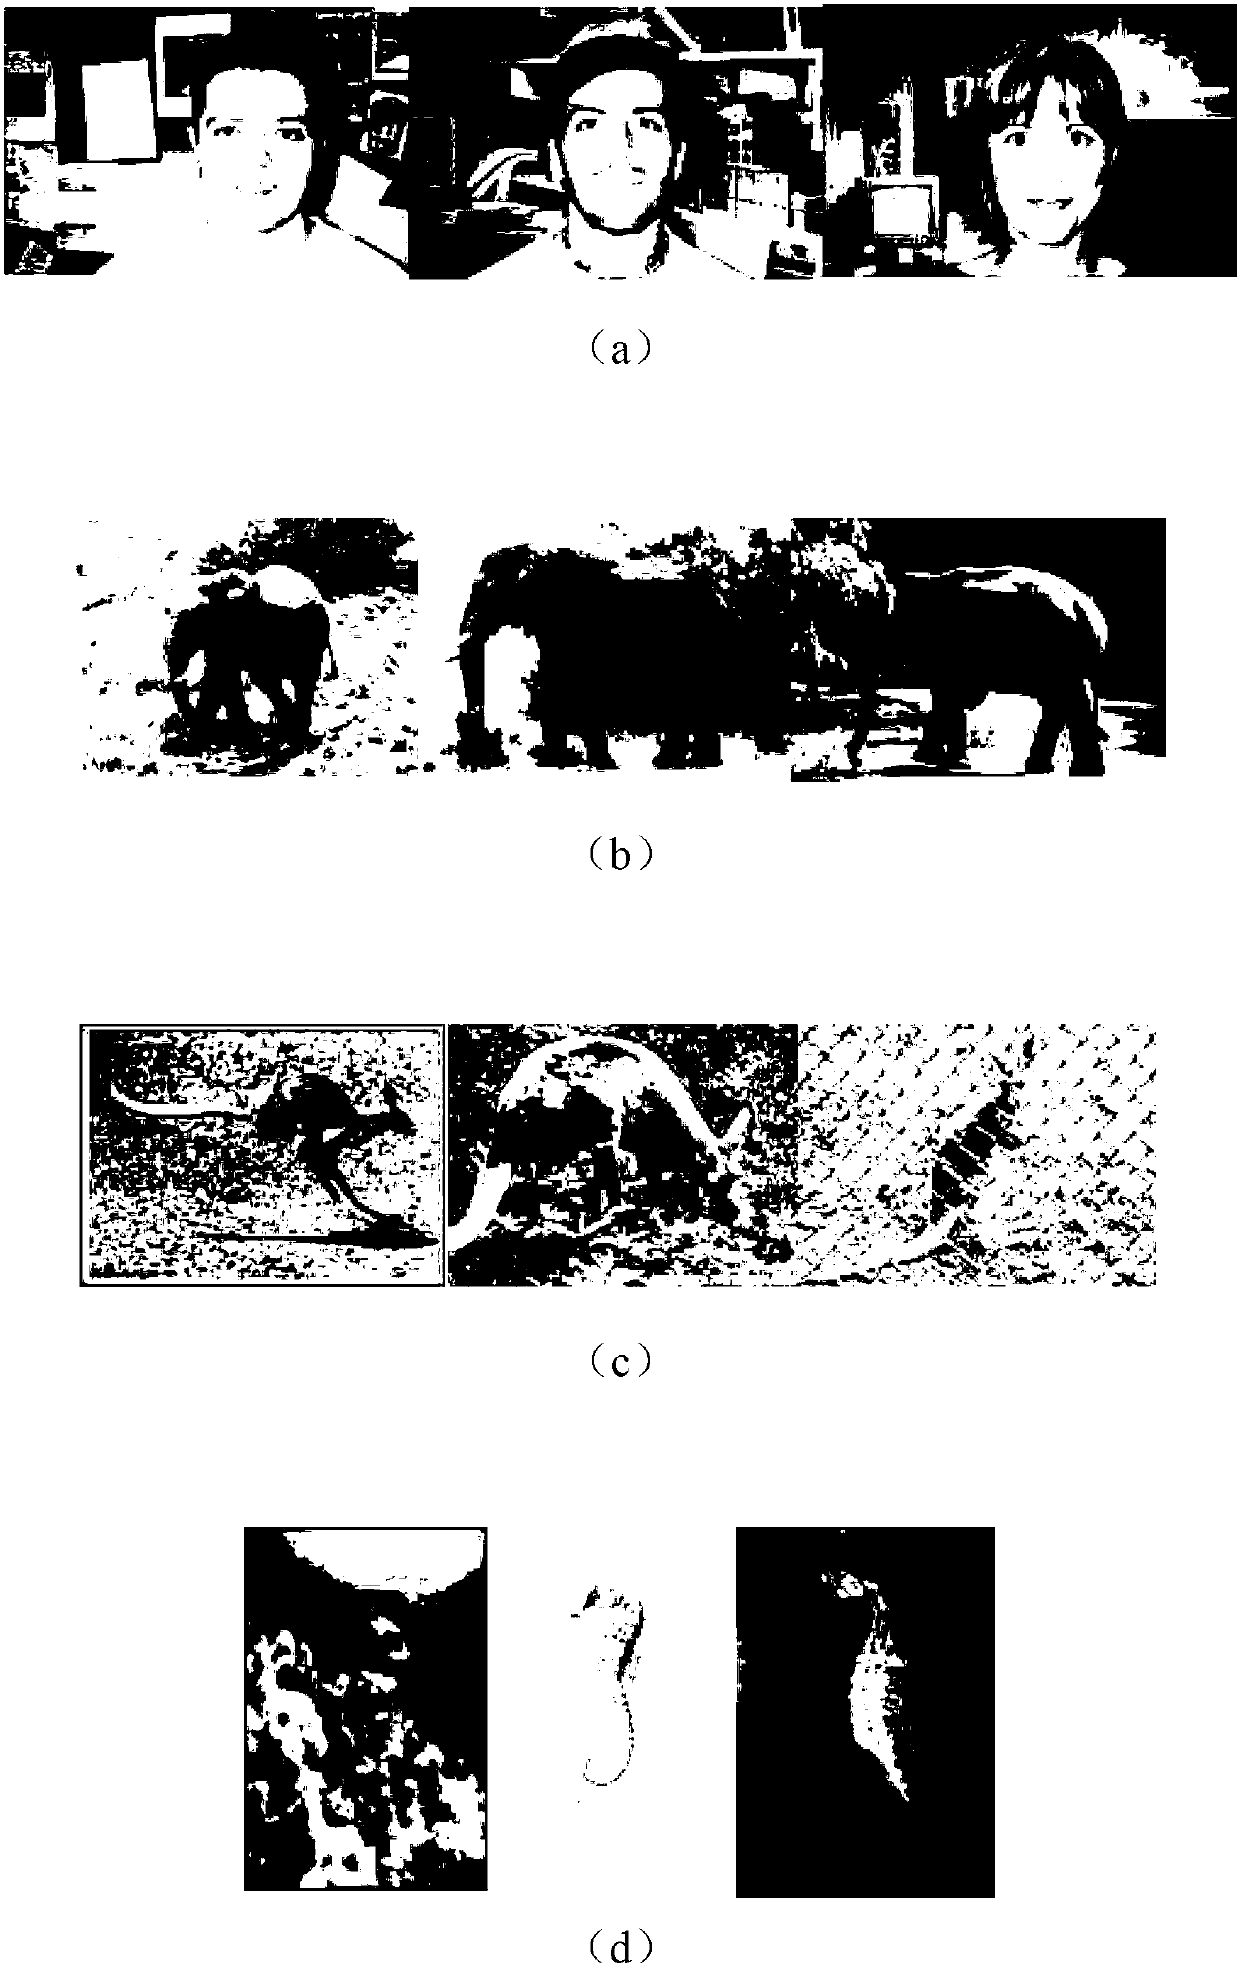 Image classification method based on hierarchical SIFT (scale-invariant feature transform) features and sparse coding